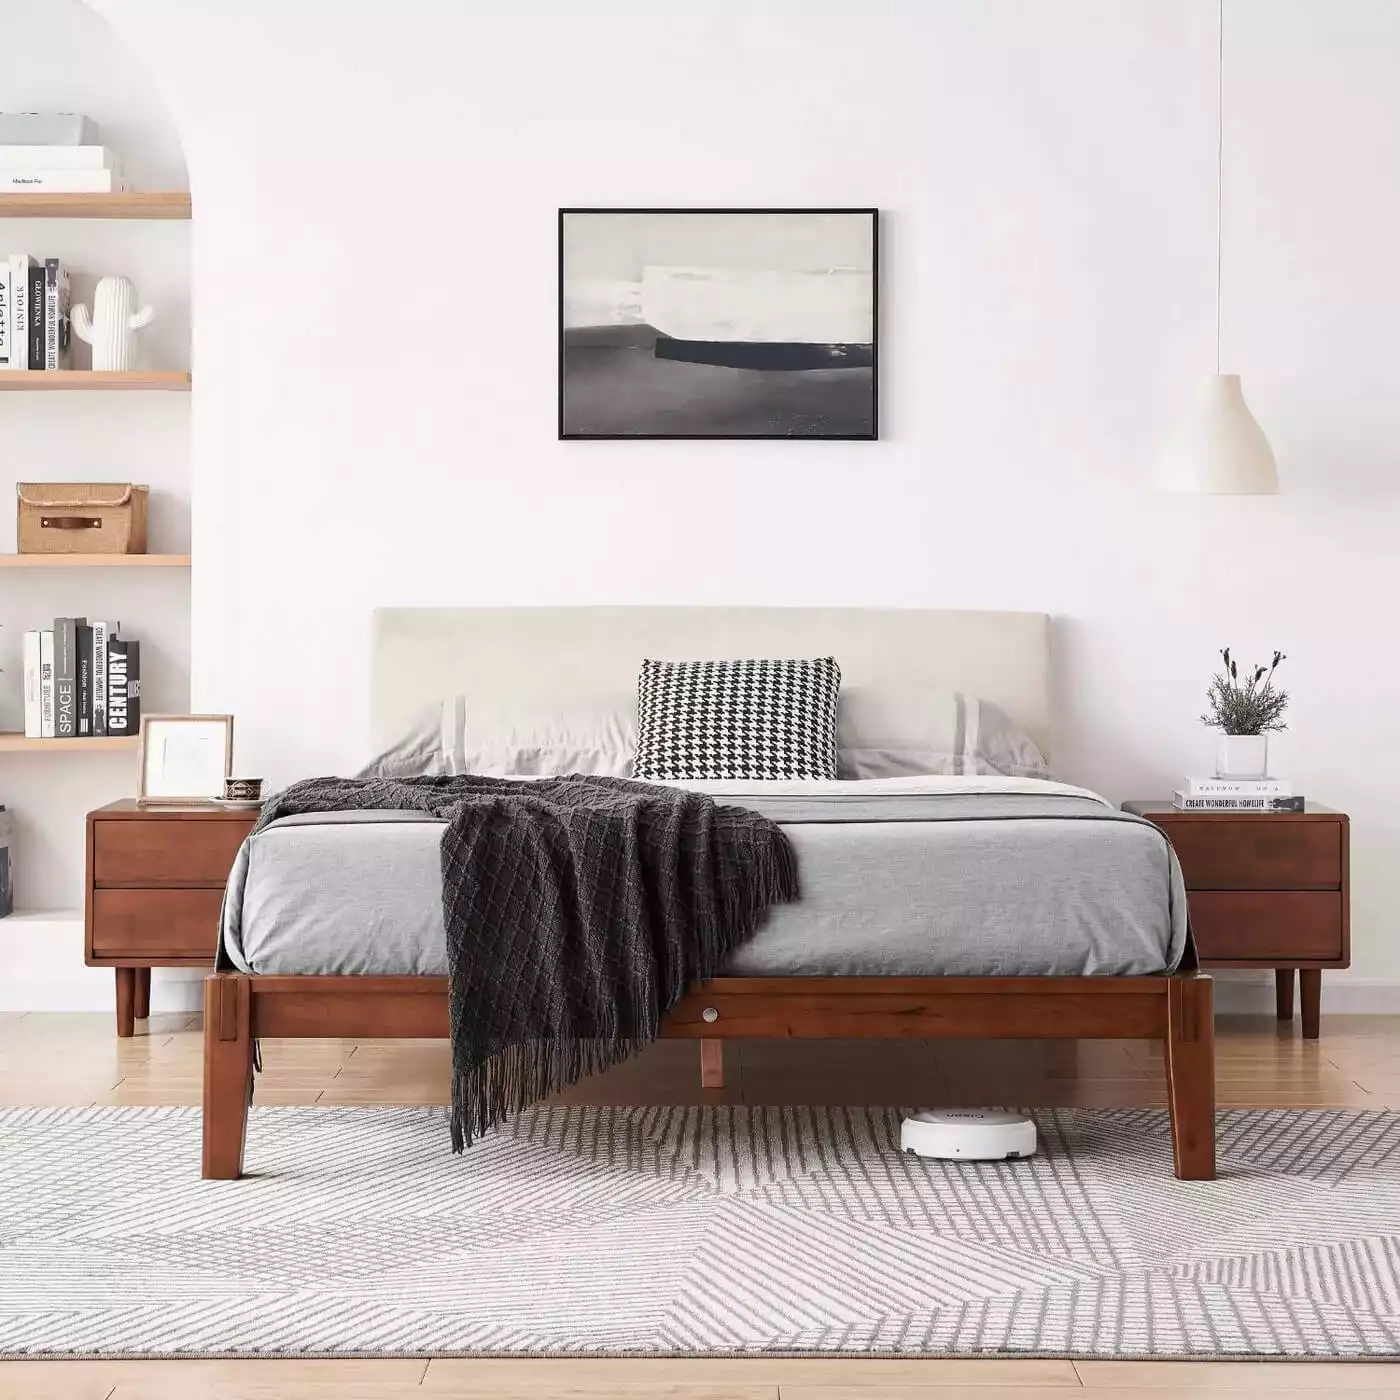 The Charm 2.0 Bed - Valyou